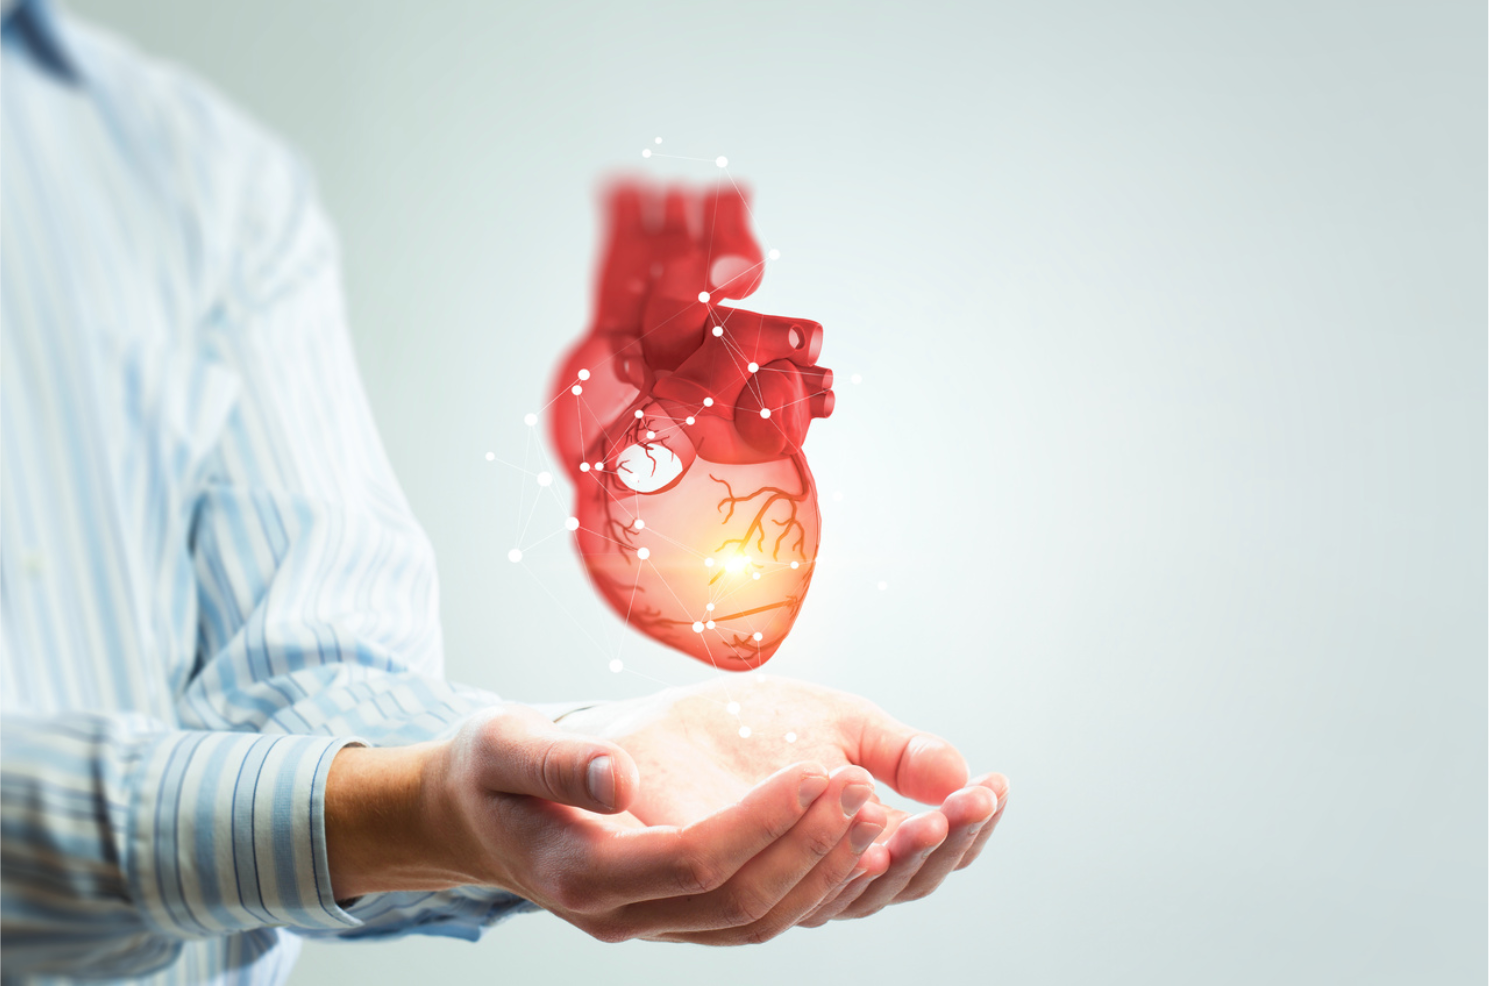 Study Launched Evaluating Vericiguat in Certain Patients With Chronic Heart Failure